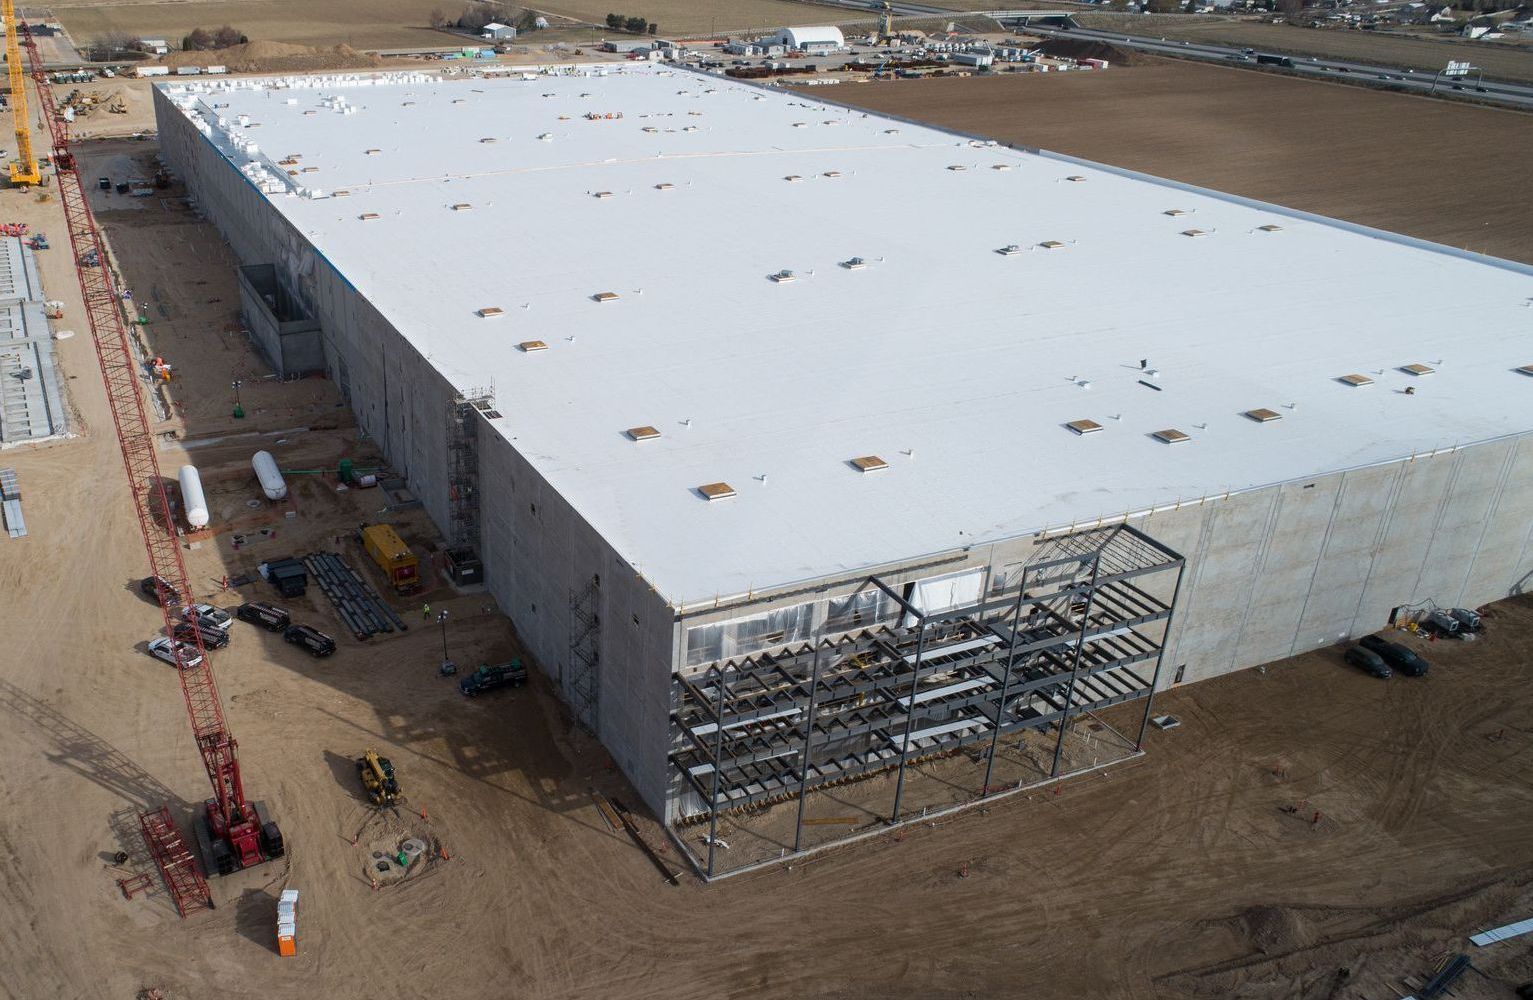 An aerial view of a large building under construction with a white roof.